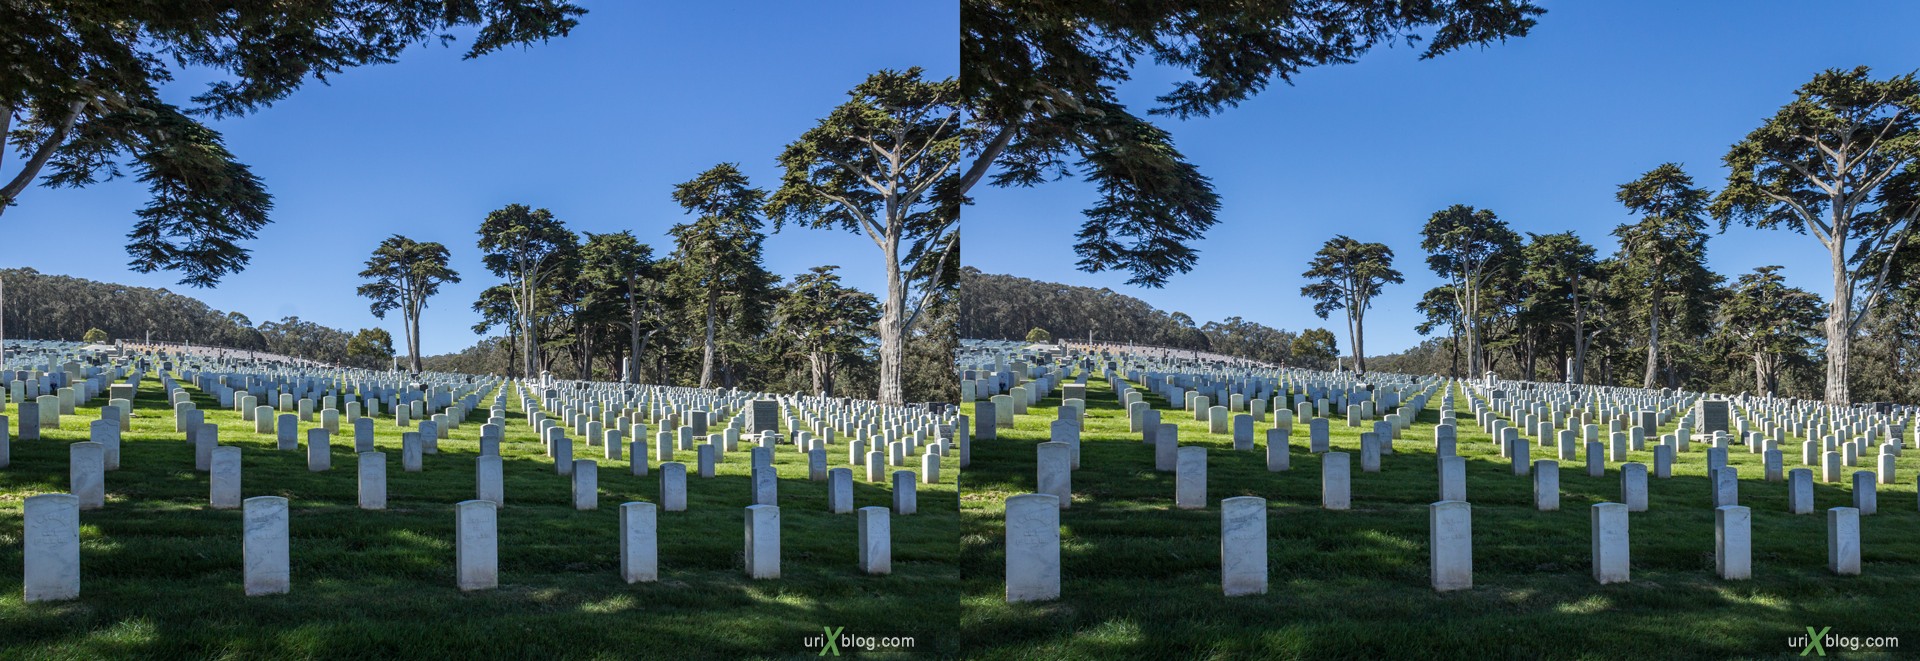 2013, USA, California, San Francisco National Cemetery, 3D, stereo pair, cross-eyed, crossview, cross view stereo pair, stereoscopic